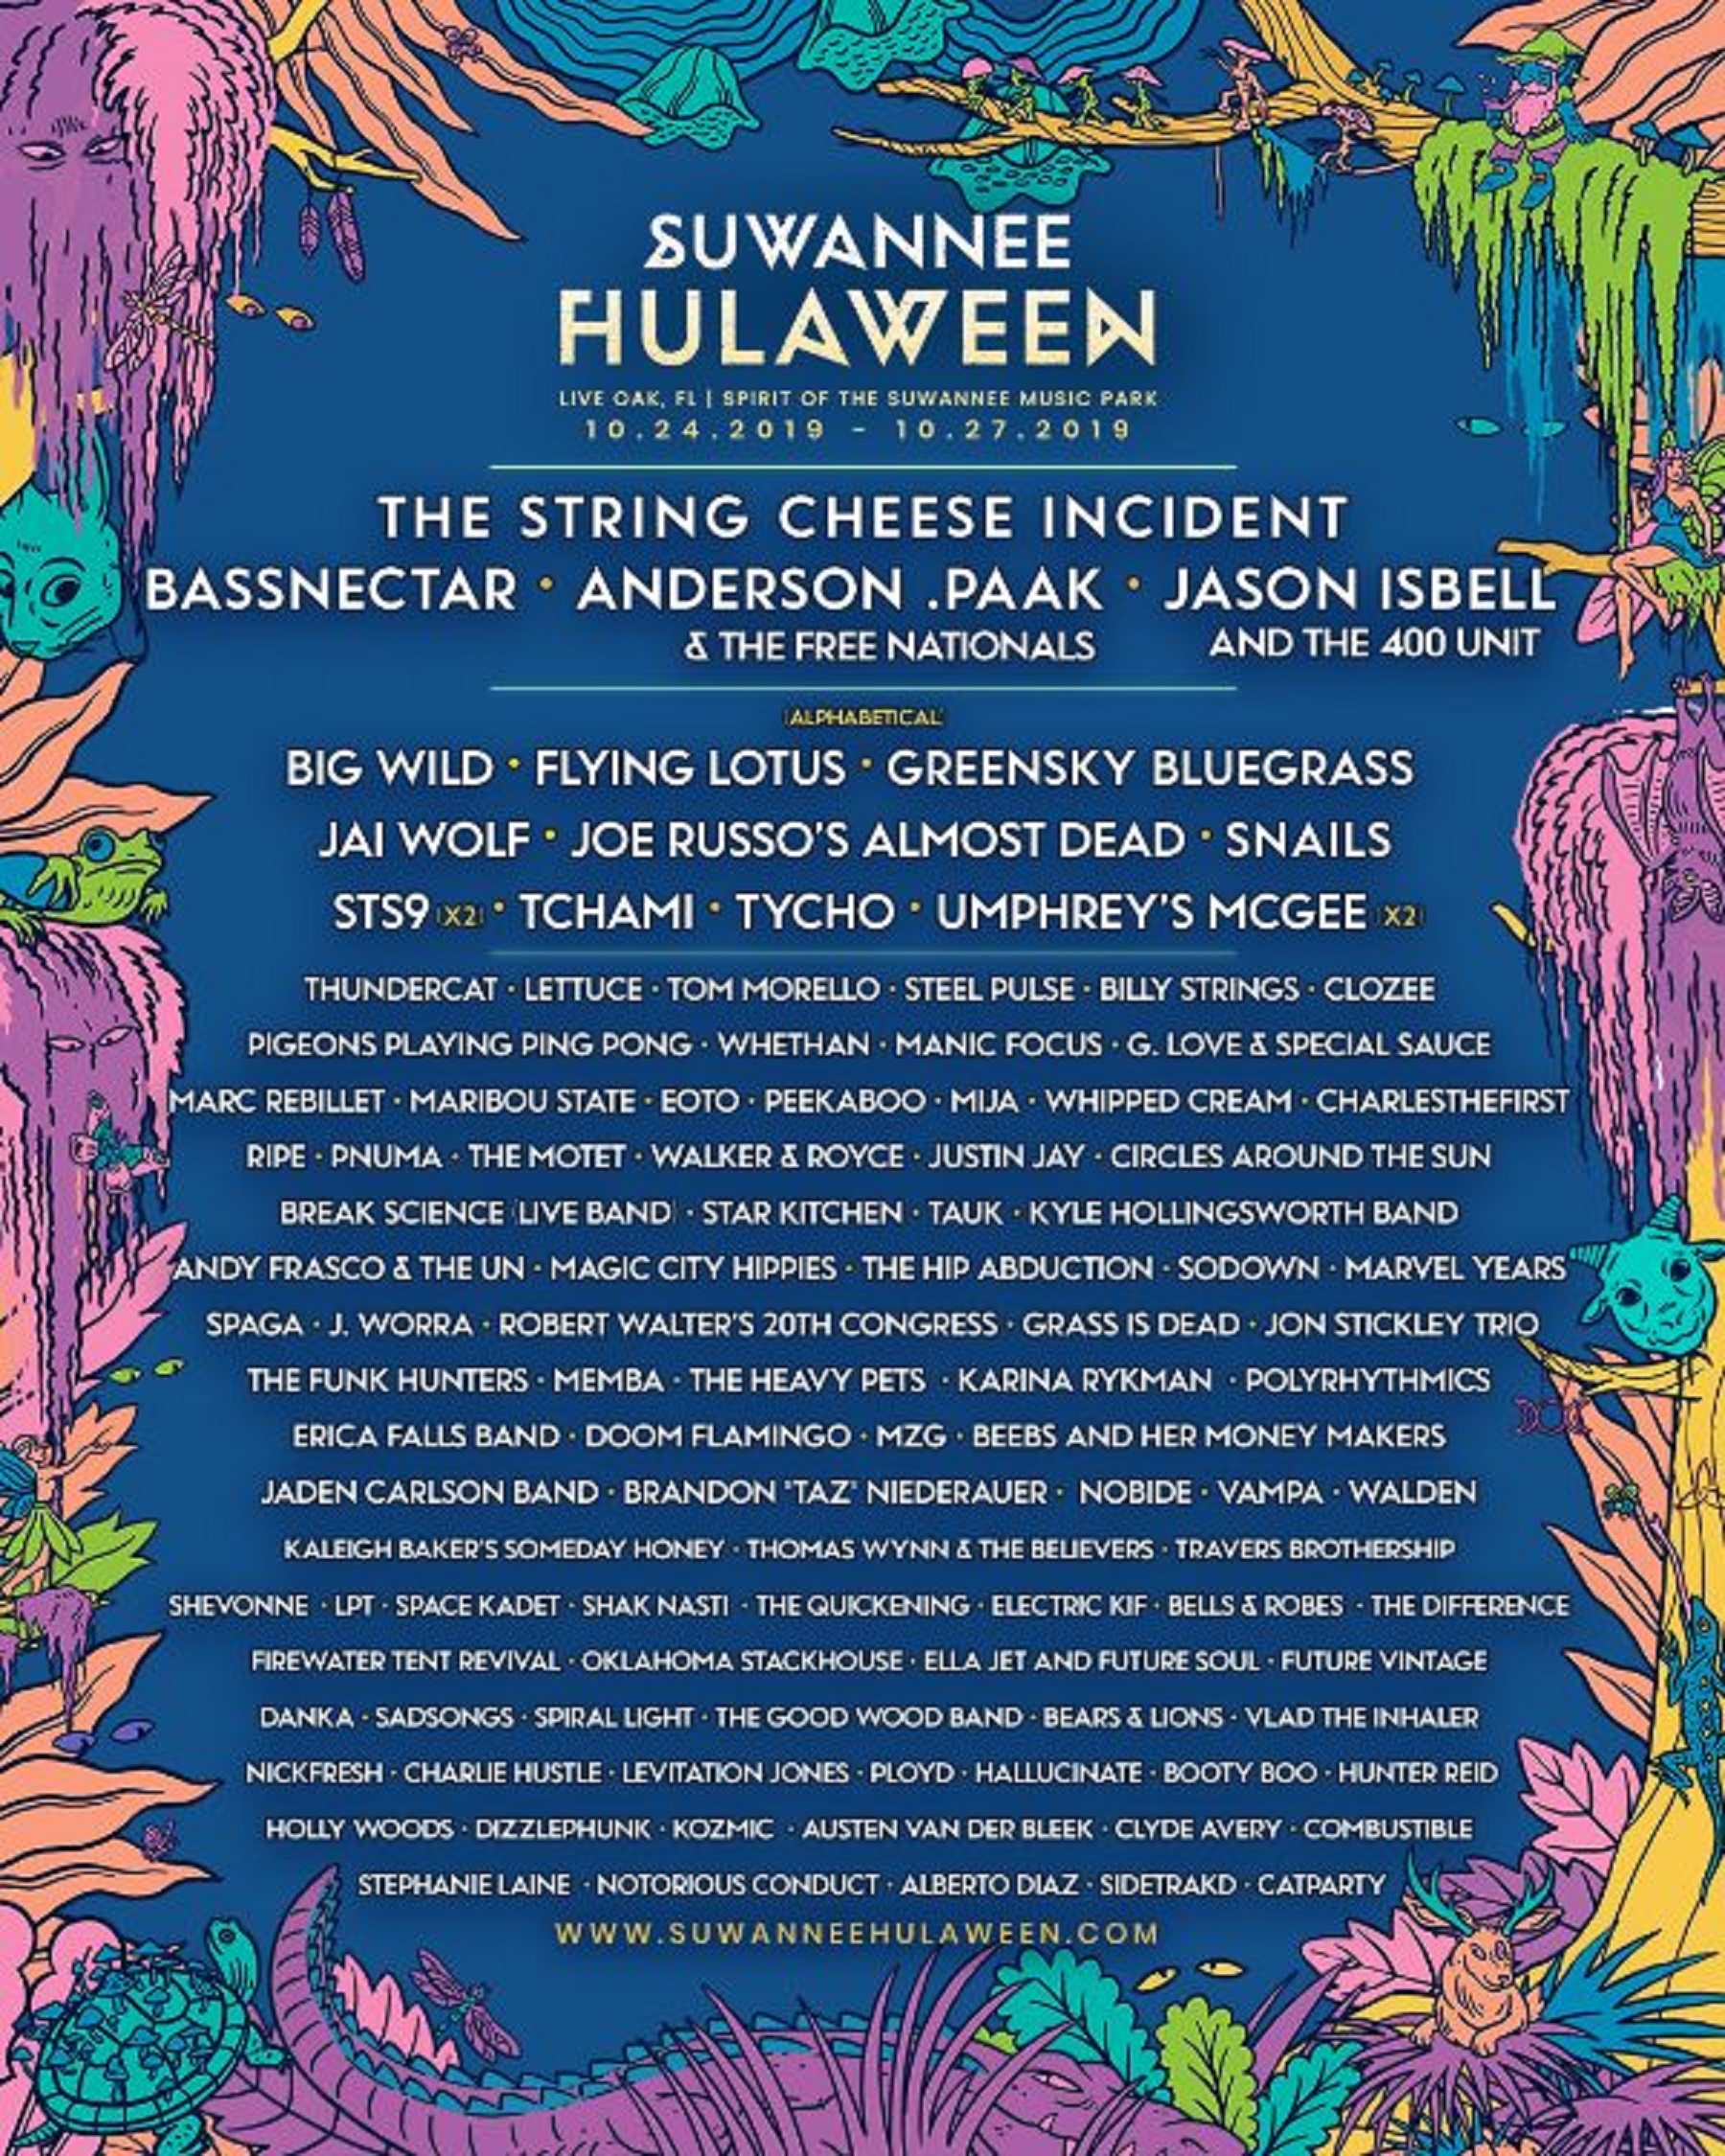 Hulaween Schedule 2022 Suwannee Hulaween To Bring Thousands To Spirit Of The Suwannee Music Park  Oct. 24-27 | Grateful Web